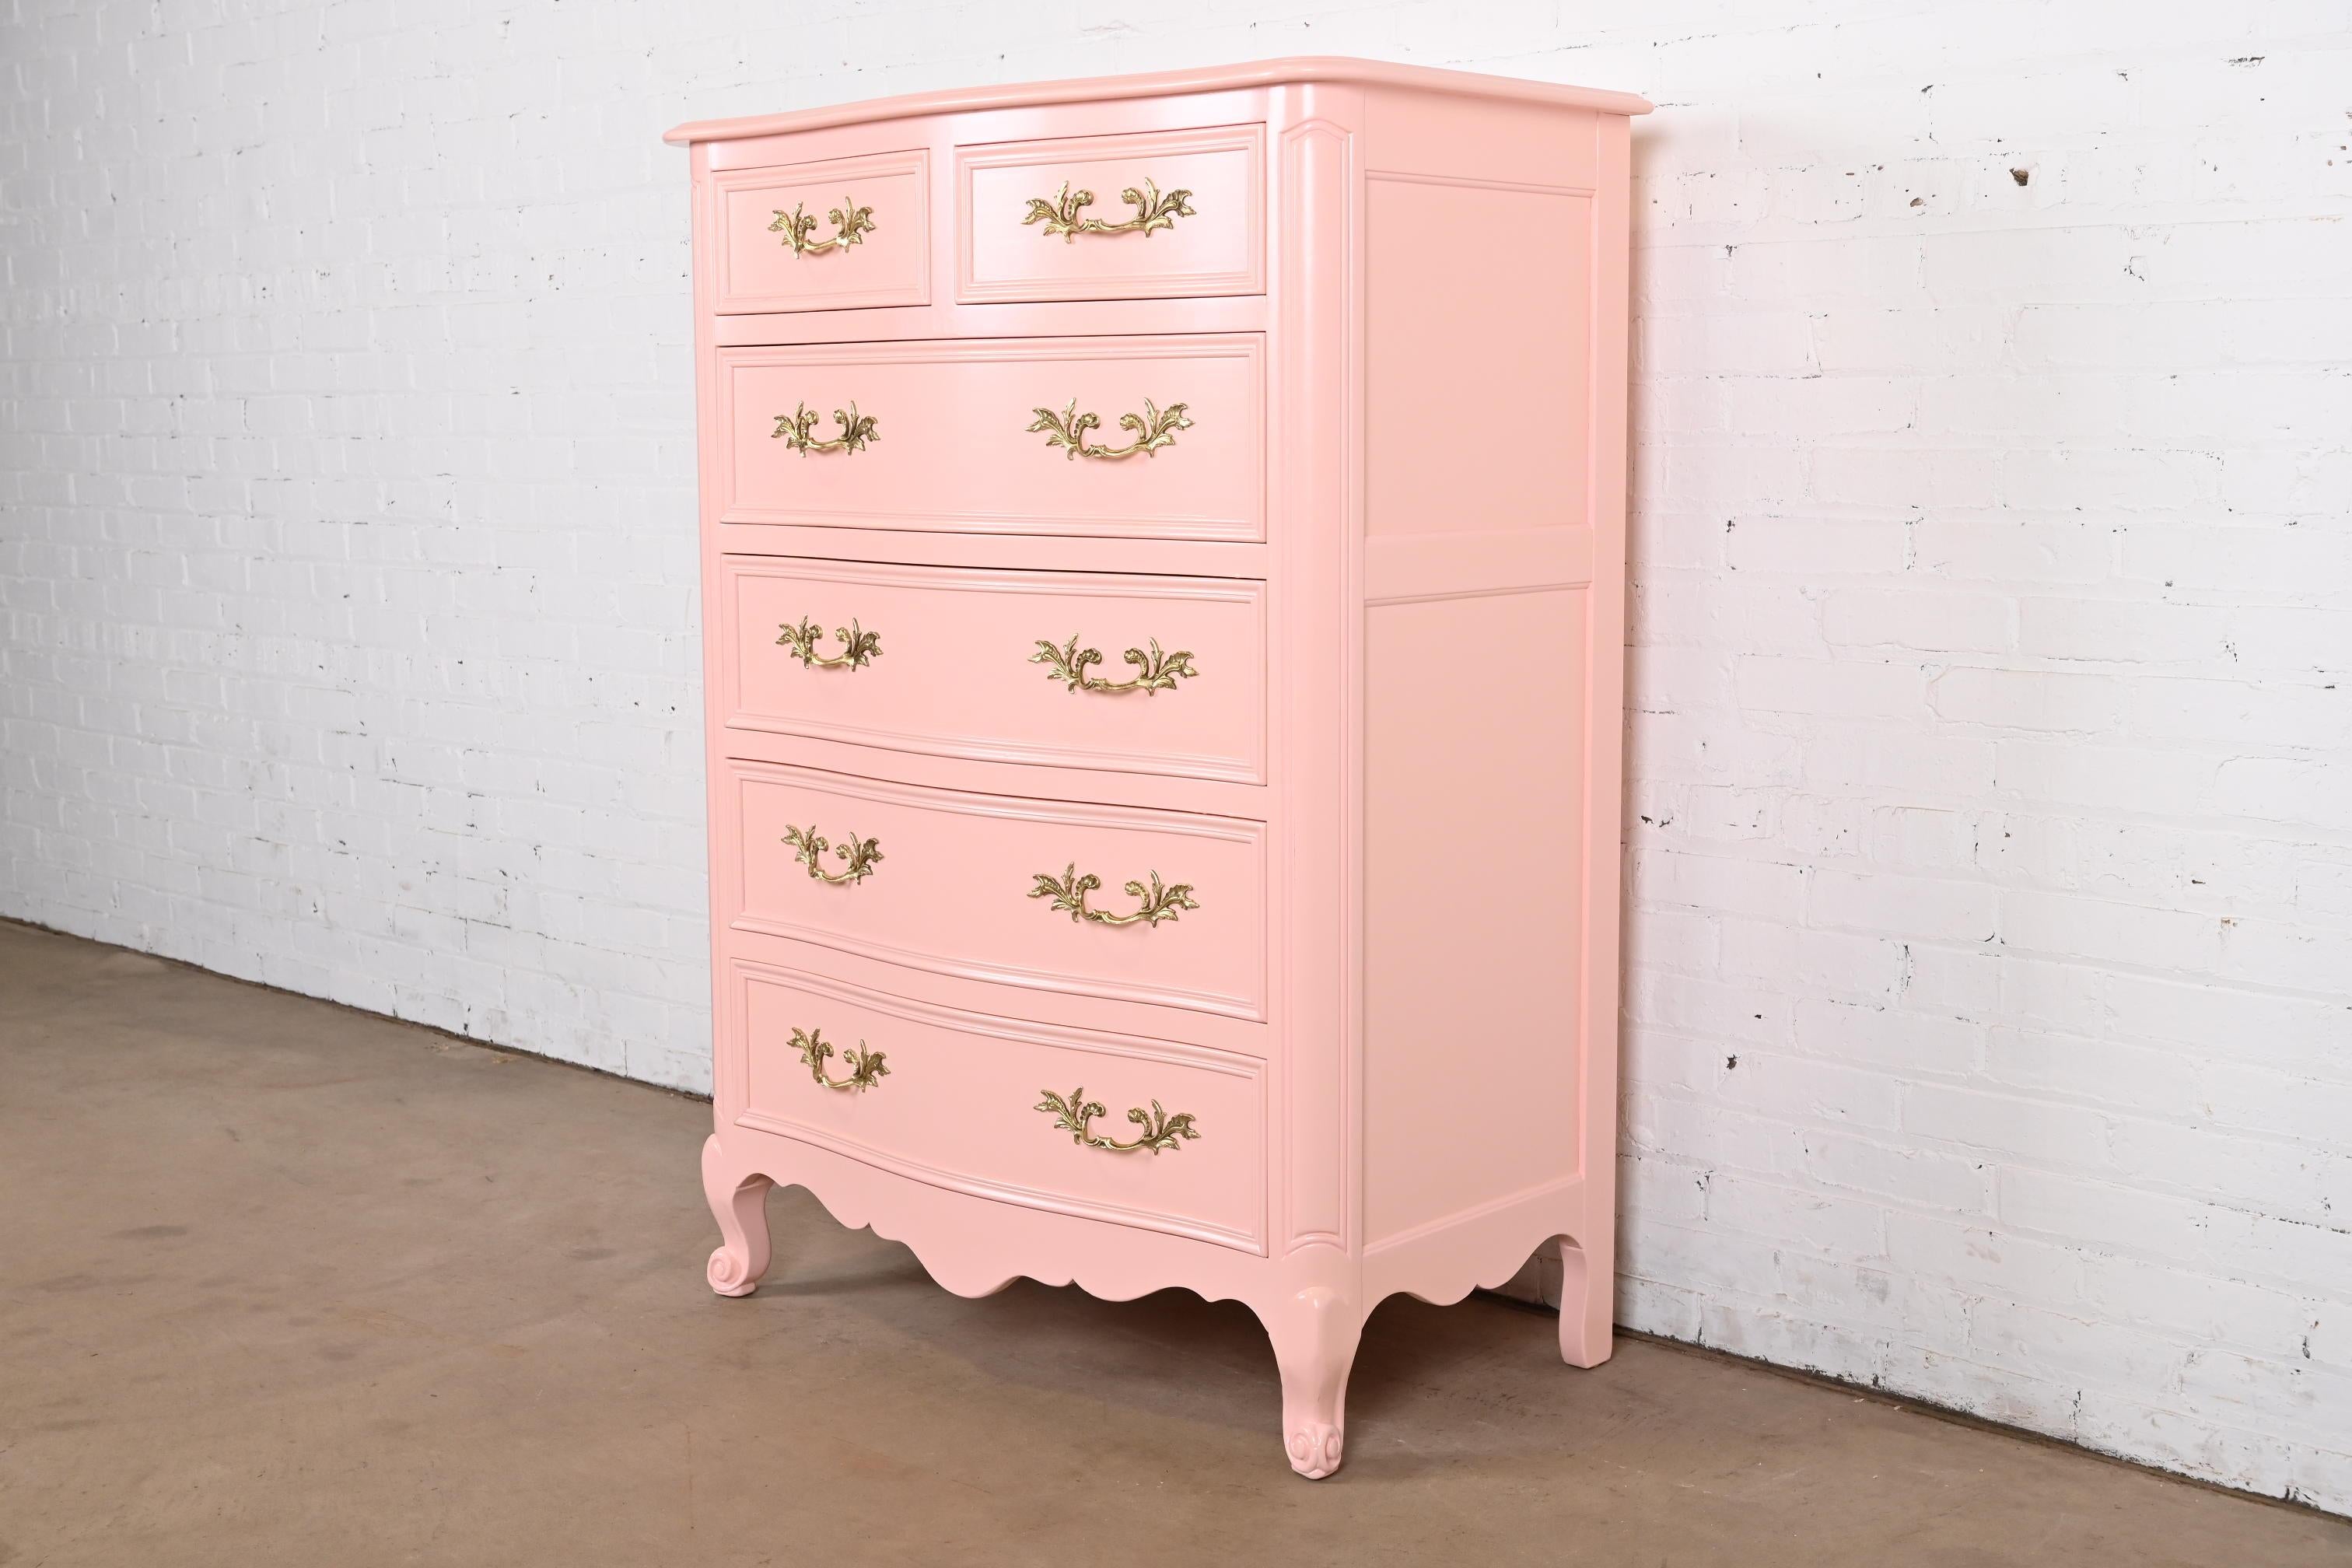 Kindel Furniture French Provincial Louis XV Pink Lacquered Highboy Dresser In Good Condition For Sale In South Bend, IN